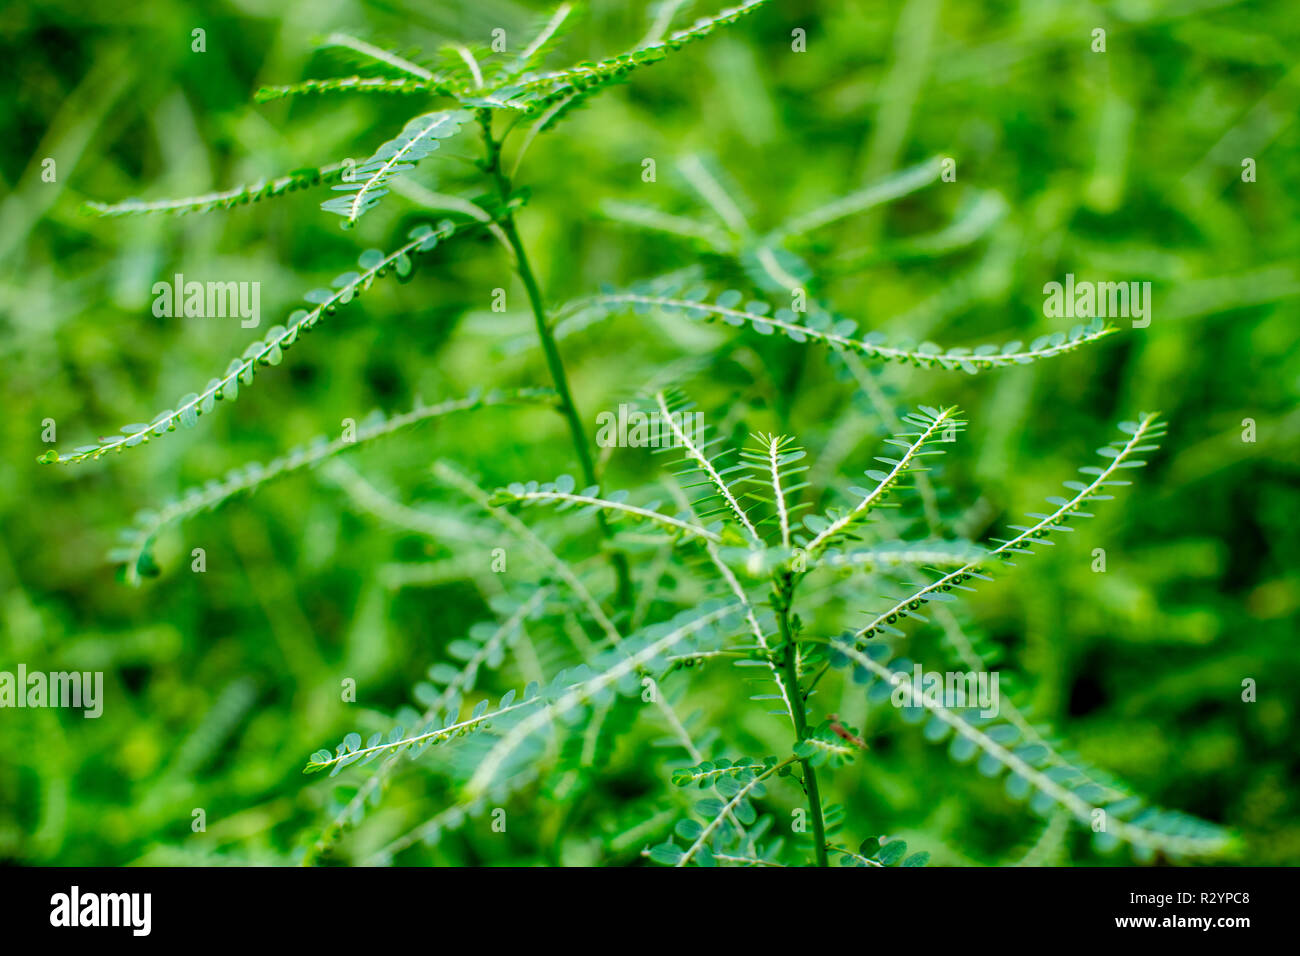 Medicinal Plant : Phyllanthus fraternus also known as Bhu-Aamla. Stock Photo